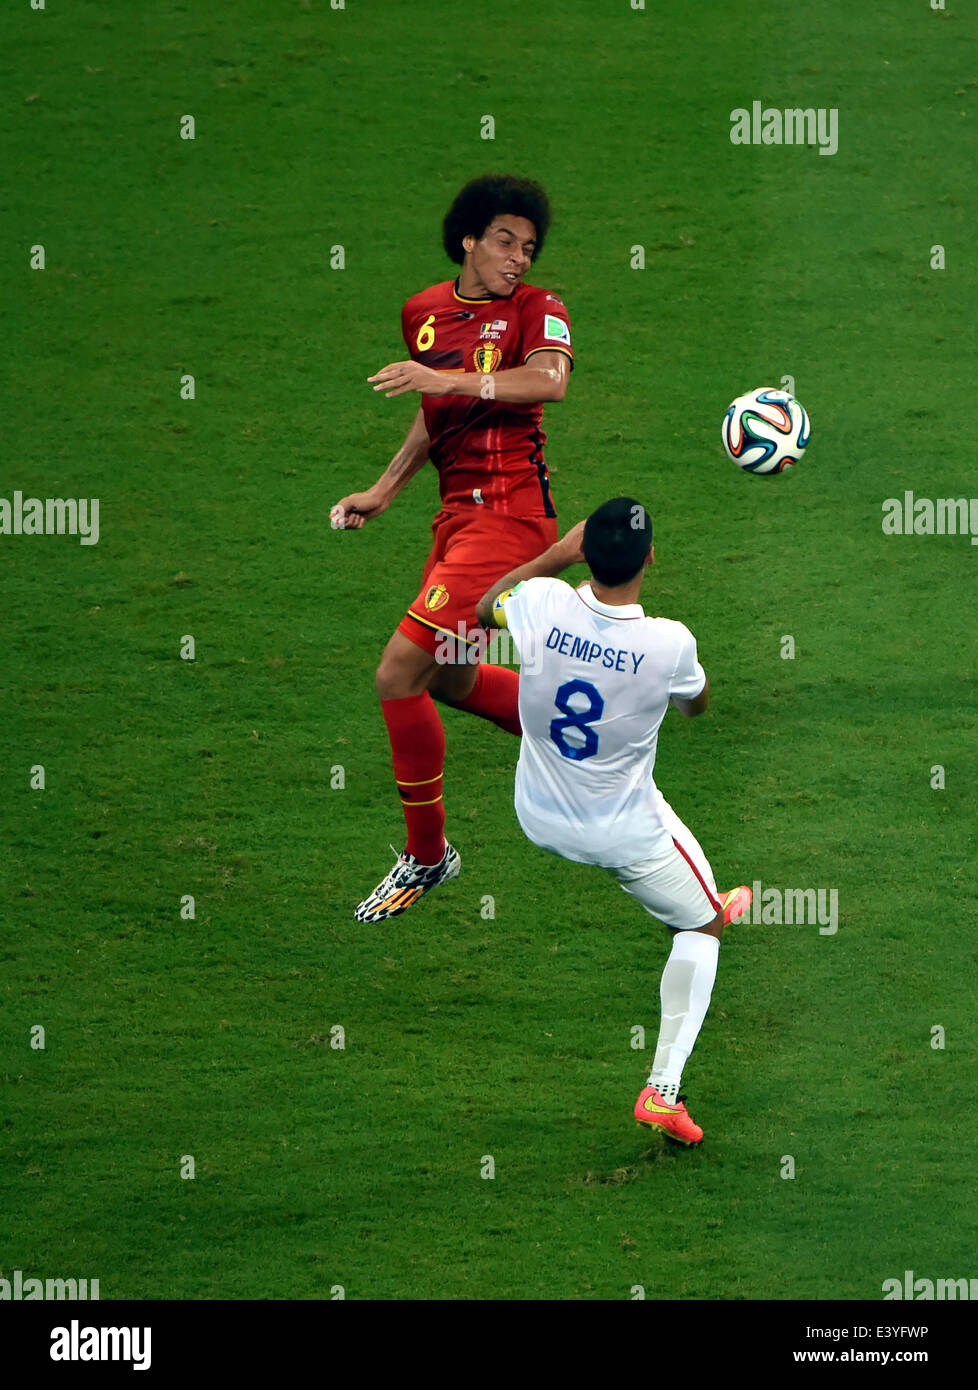 Salvador, Brazil. 1st July, 2014. Clint Dempsey (R) of the U.S. vies with Belgium's Axel Witsel during a Round of 16 match between Belgium and the U.S. of 2014 FIFA World Cup at the Arena Fonte Nova Stadium in Salvador, Brazil, on July 1, 2014. Credit:  Guo Yong/Xinhua/Alamy Live News Stock Photo